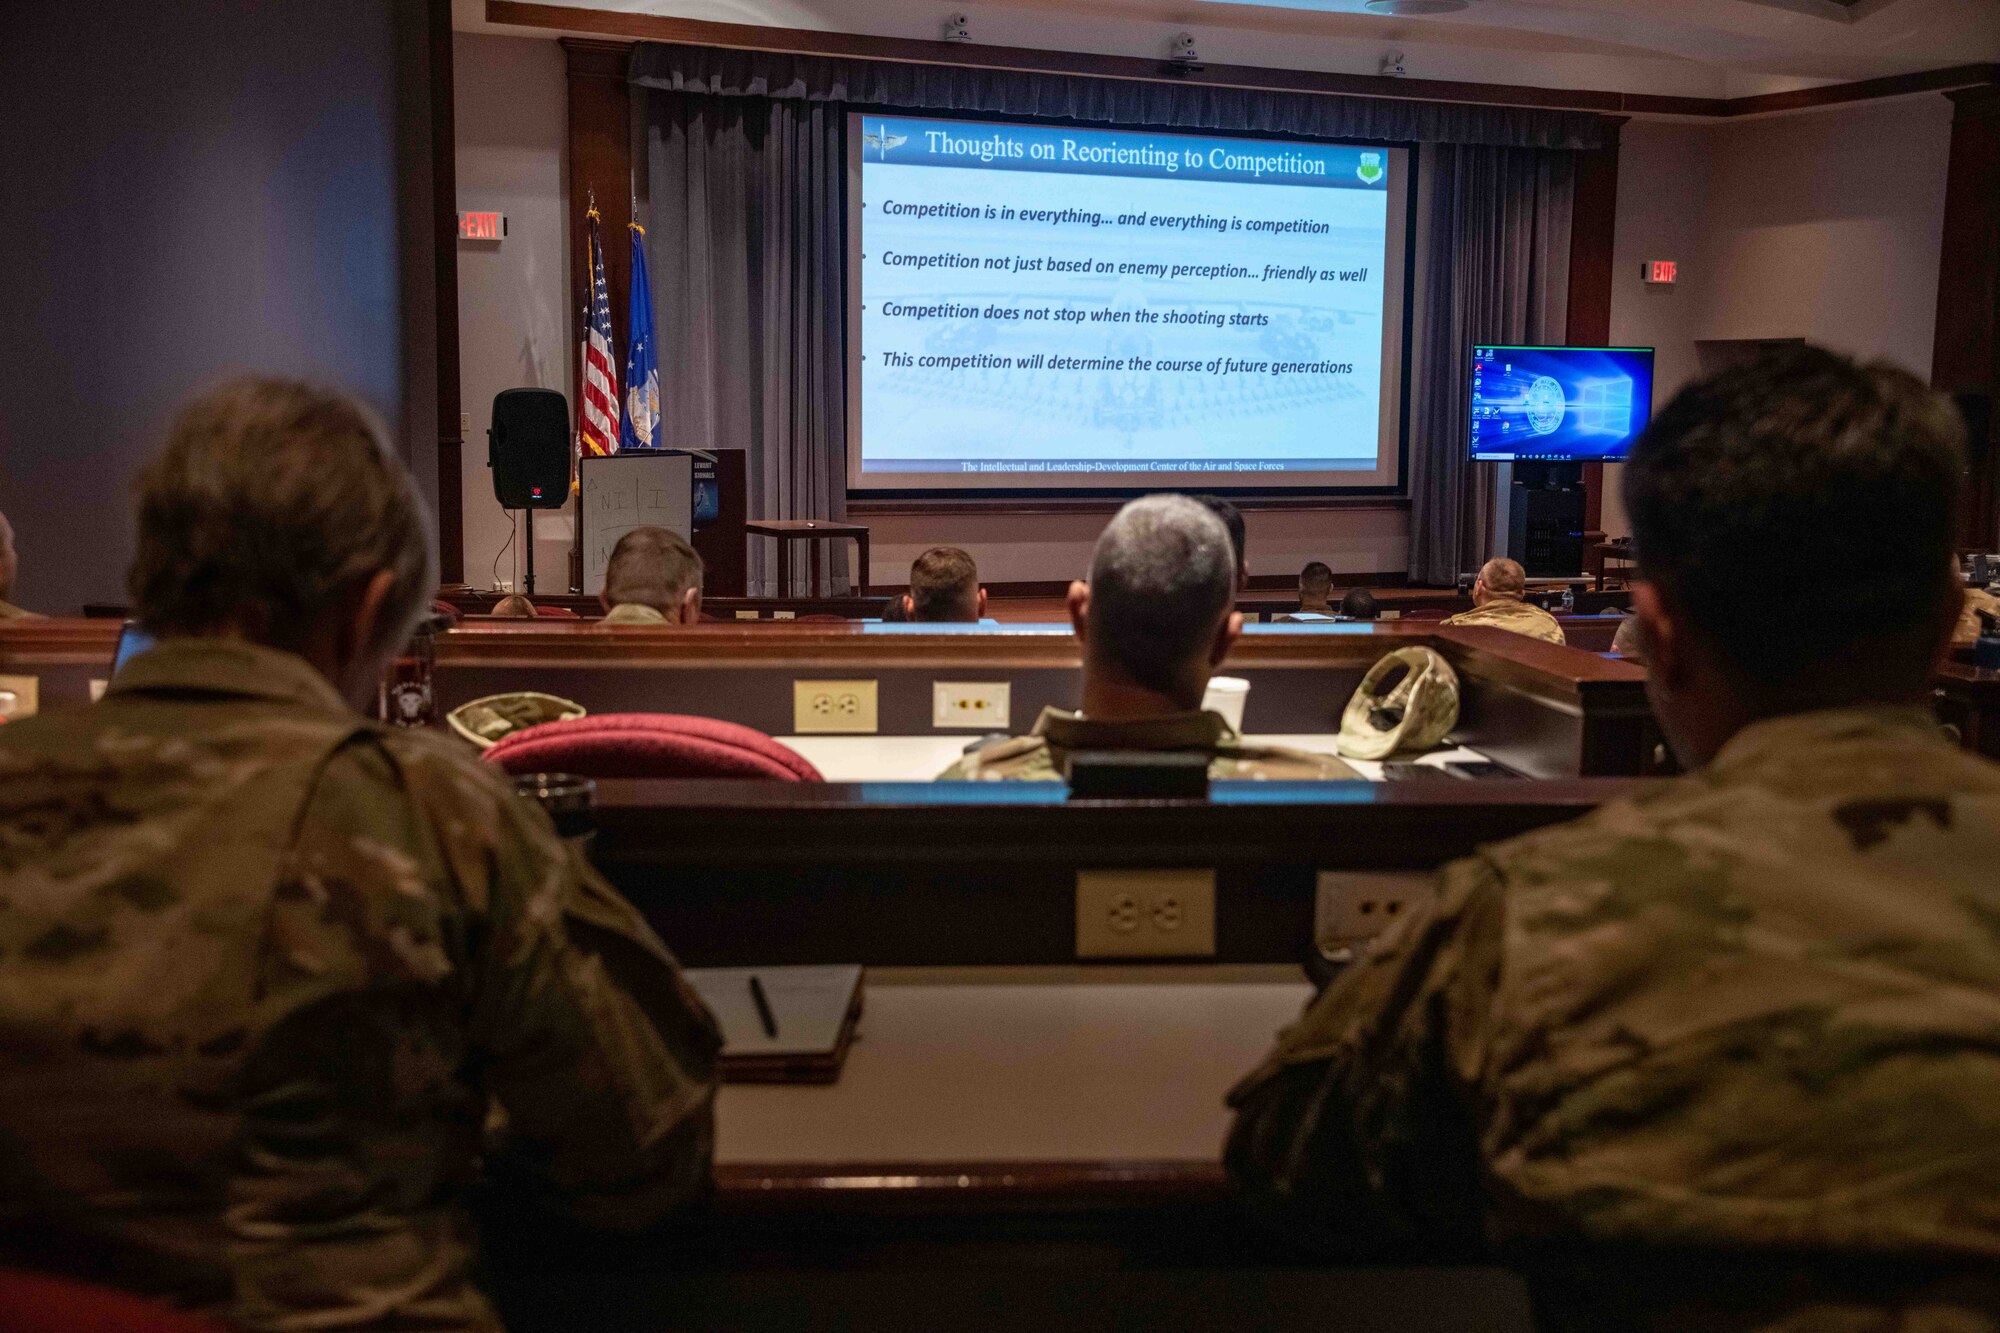 Air Education and Training Command’s newest chief master sergeants receive a virtual briefing on strategic competition on the first day of the weeklong Chiefs Orientation course at Air University, Maxwell Air Force Base, Alabama, Feb. 13, 2023. The Combat Air Forces chair at Air University, Col. Scott Hoffman, briefed the 51 new senior enlisted leaders.